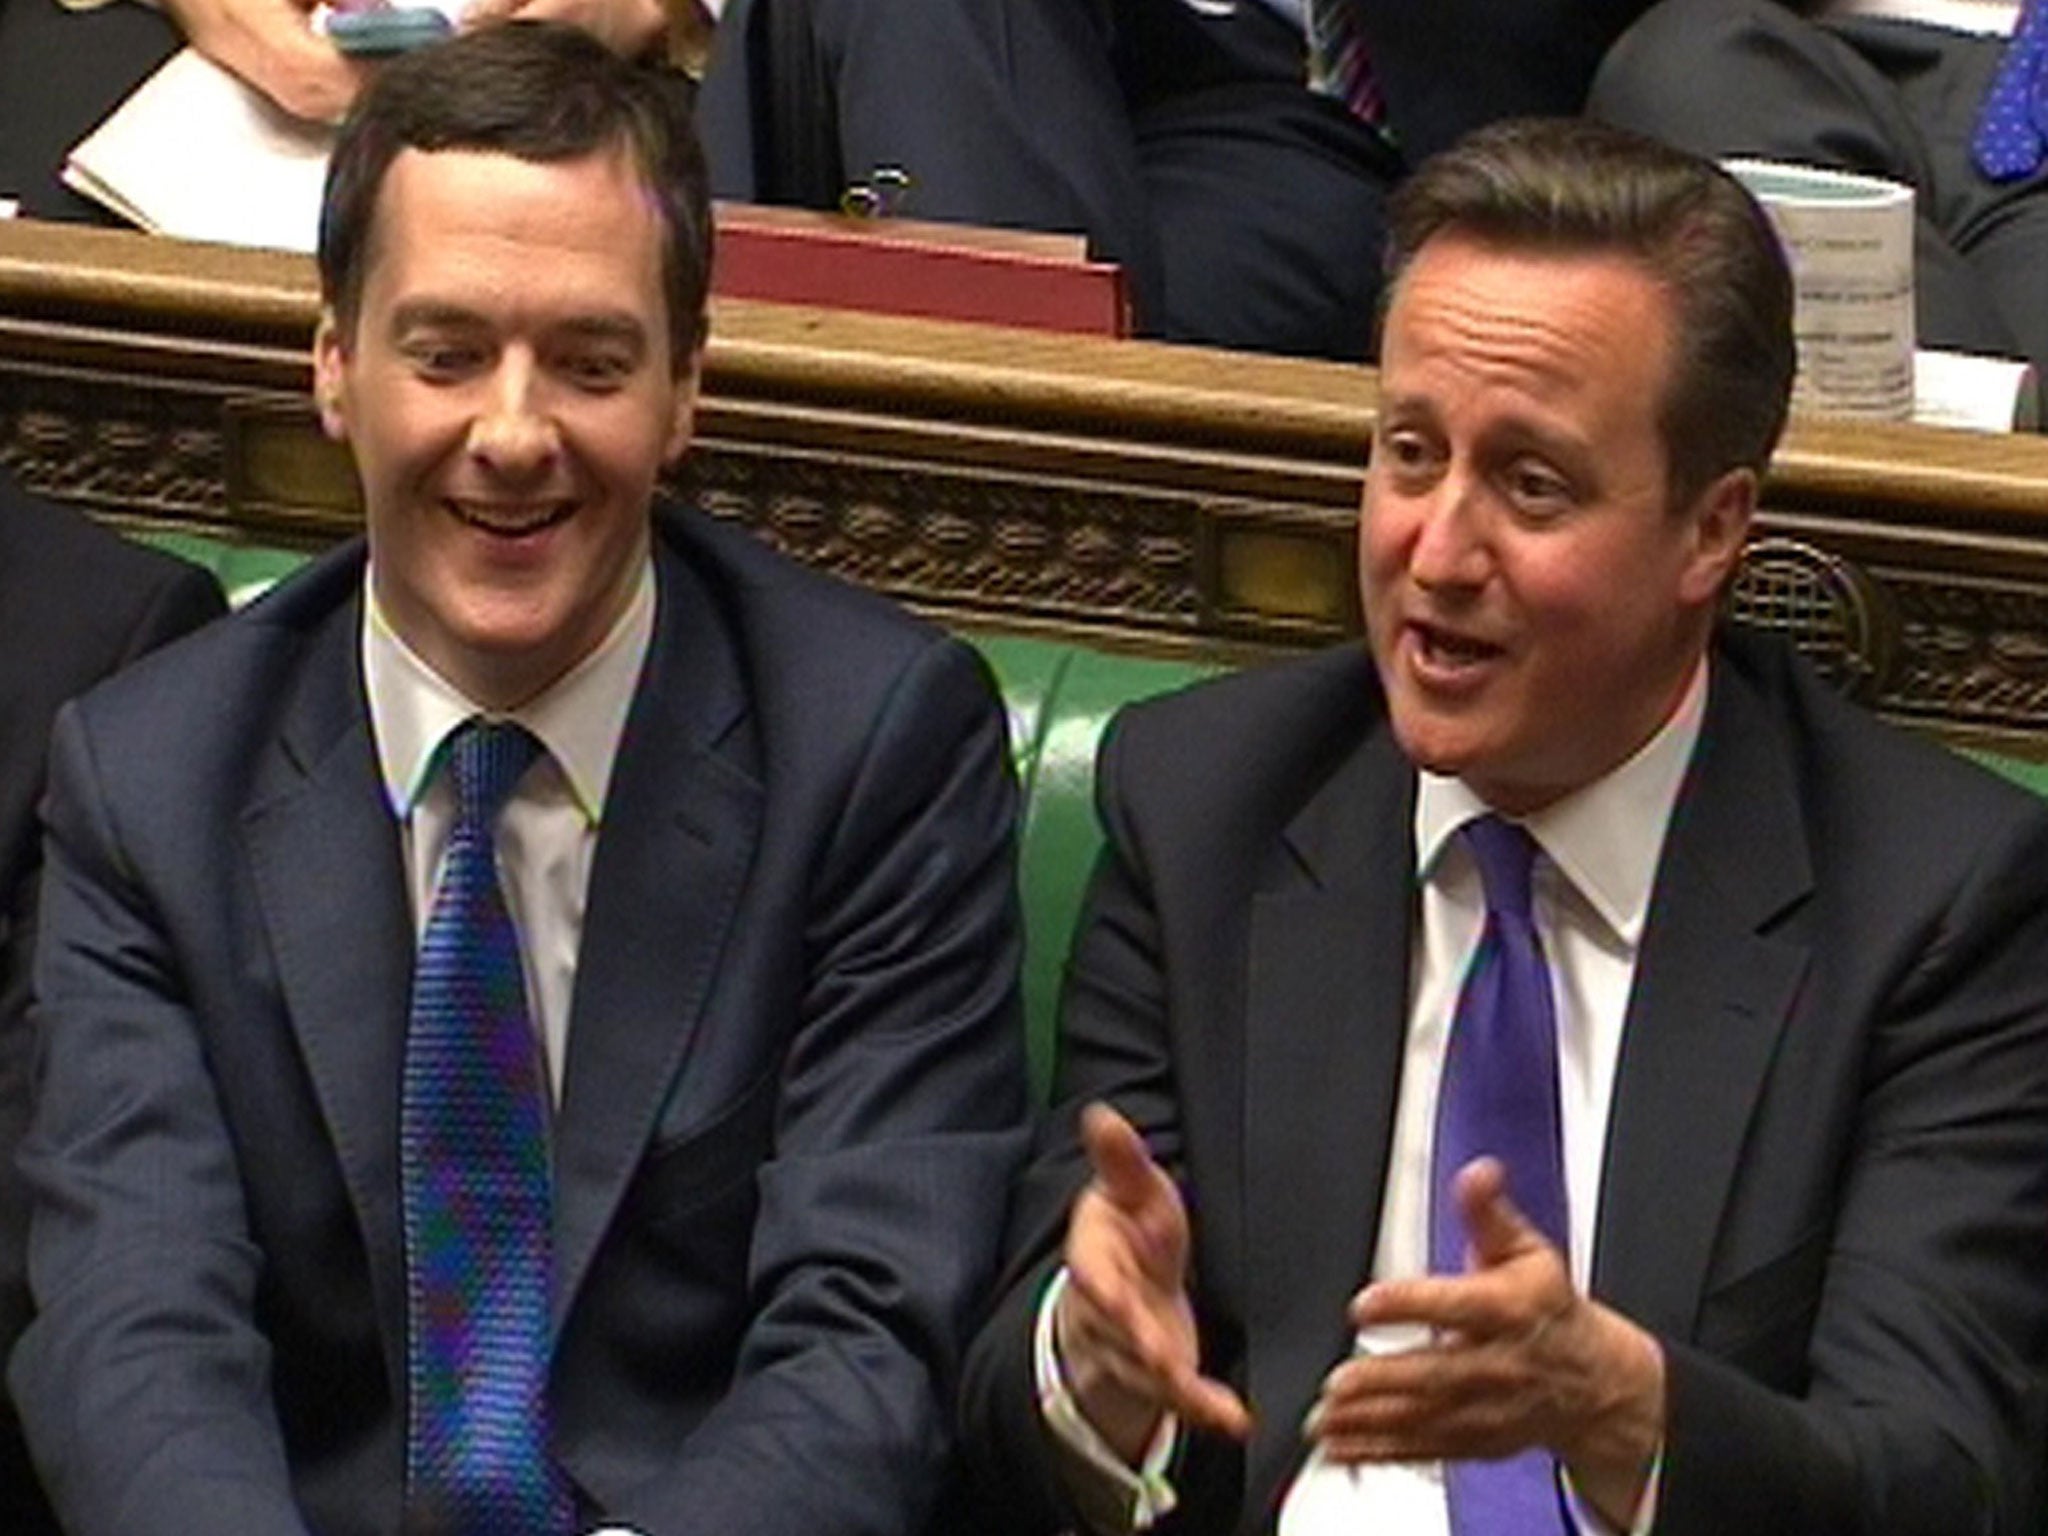 Chancellor of the Exchequer George Osborne and Prime Minister David Cameron laugh as Labour party leader Ed Miliband responds to his Budget statement to the House of Commons